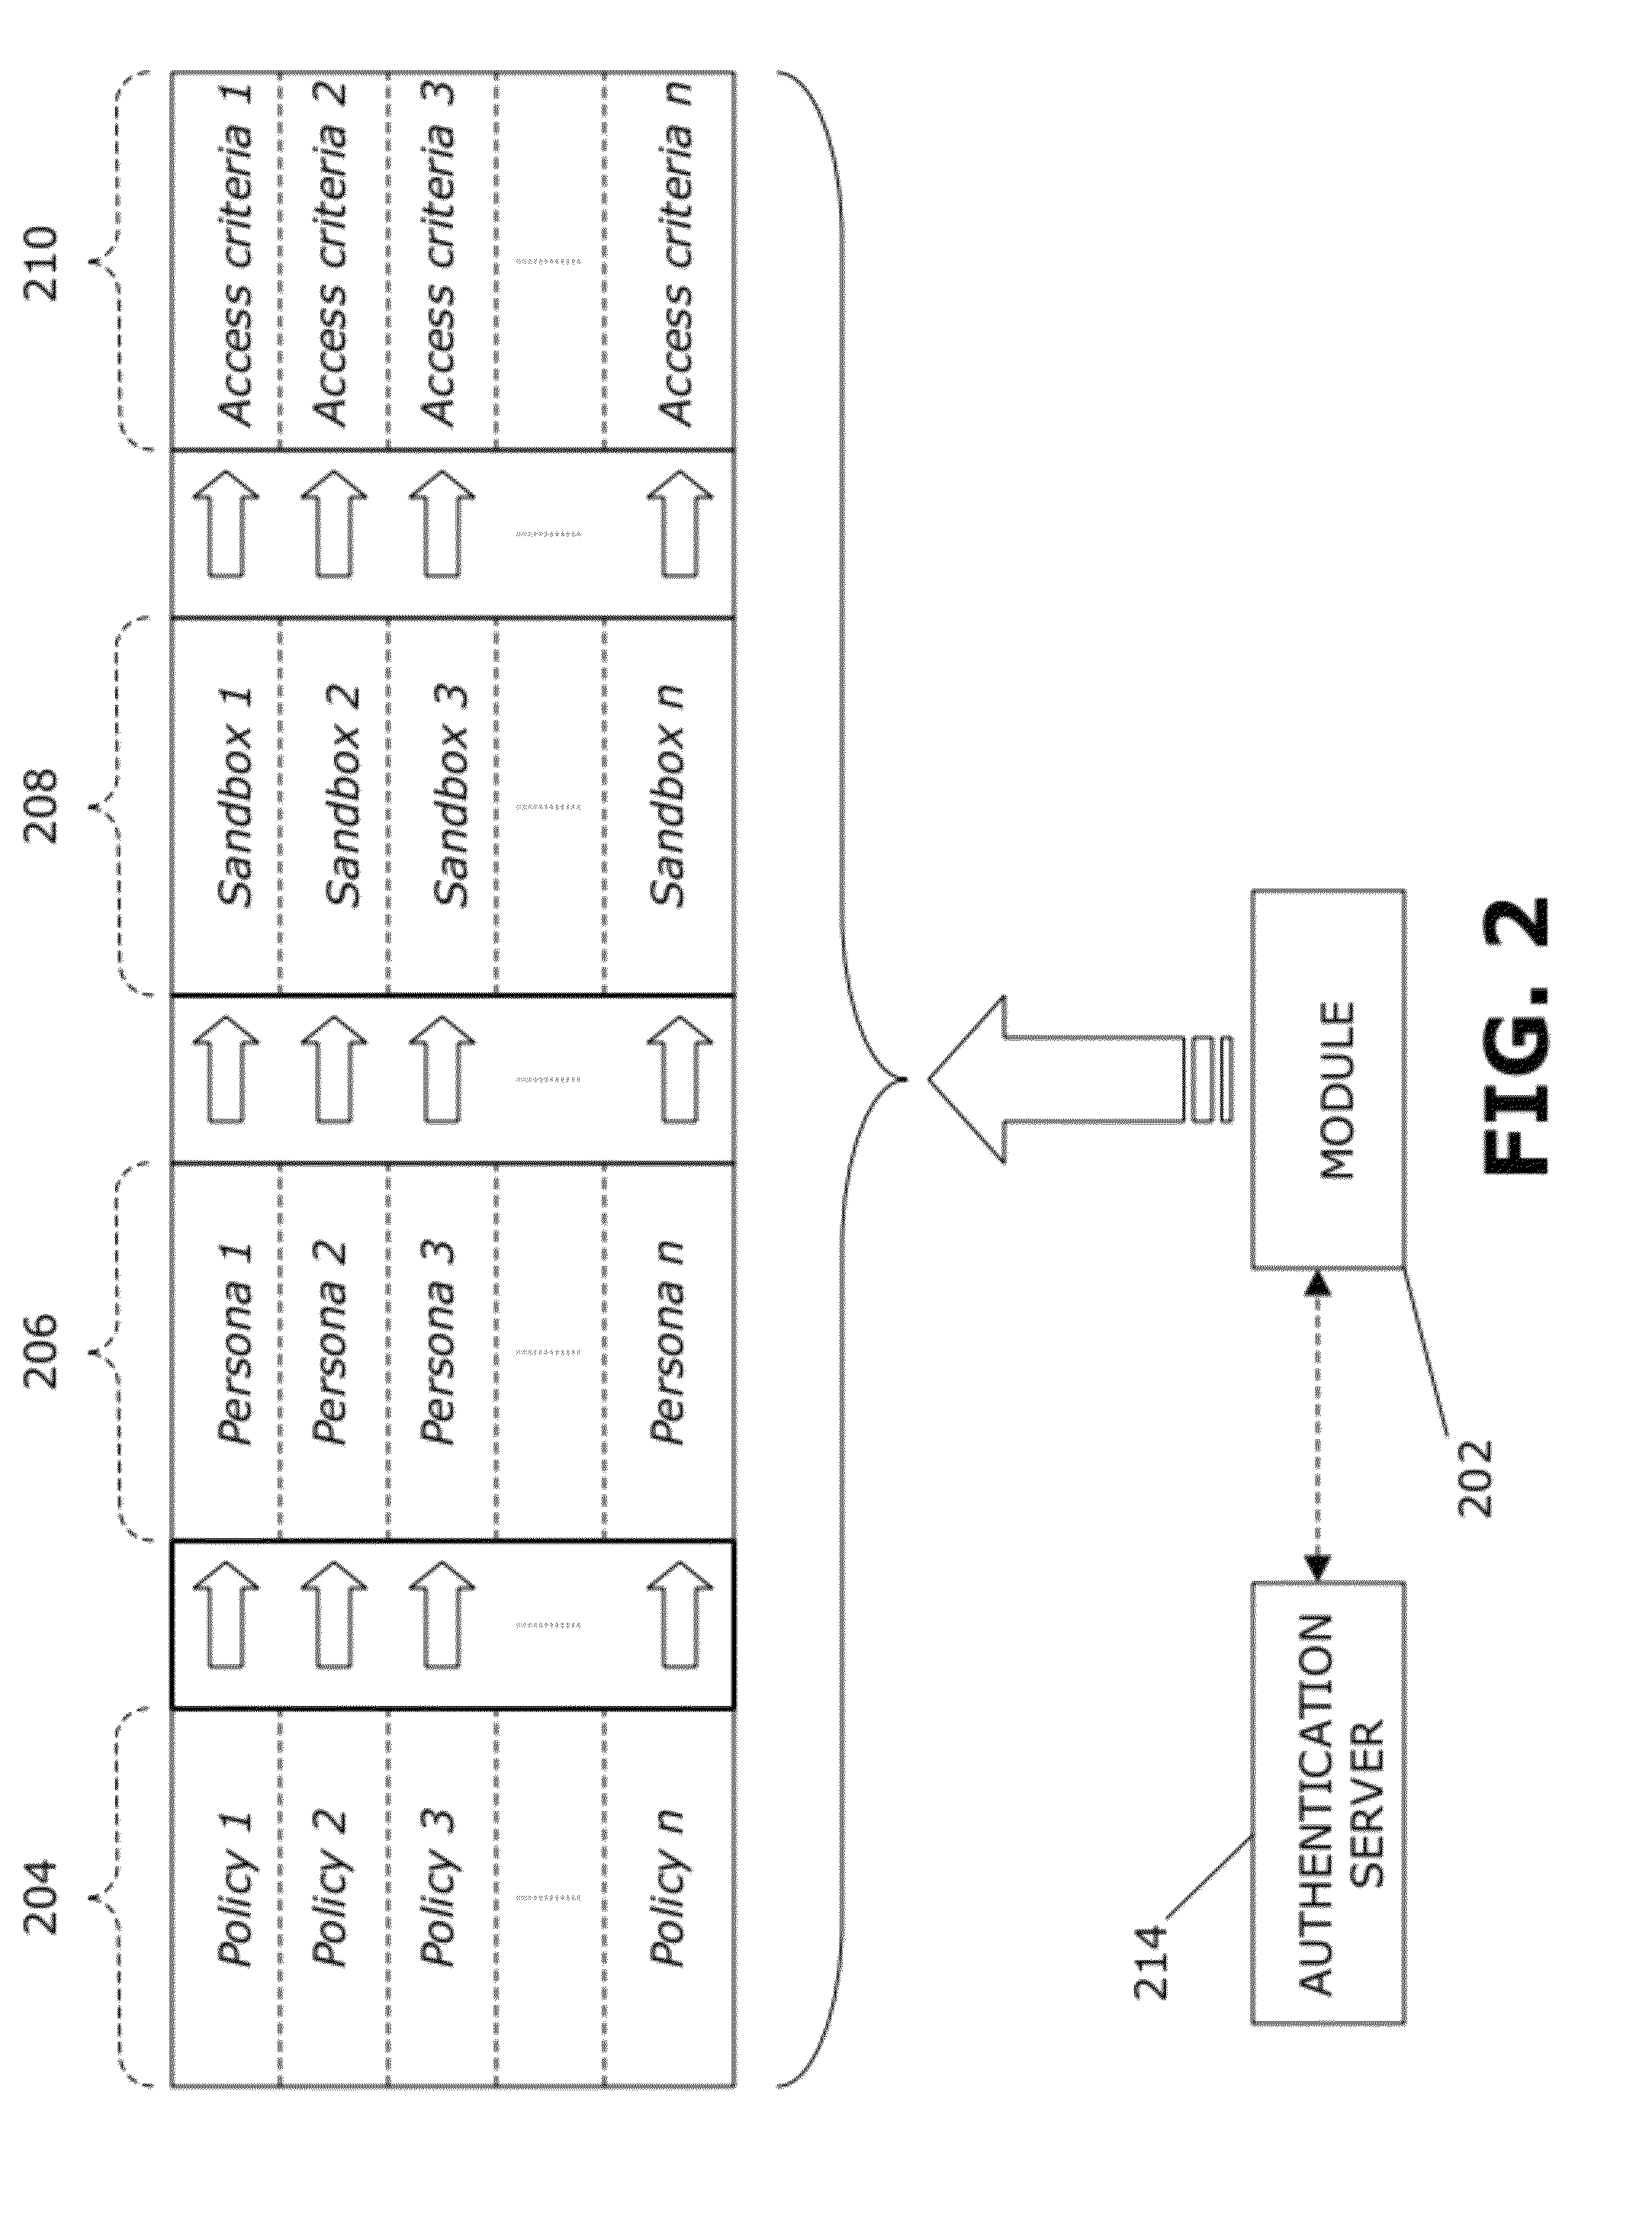 Systems and methods to control device endpoint behavior using personae and policies